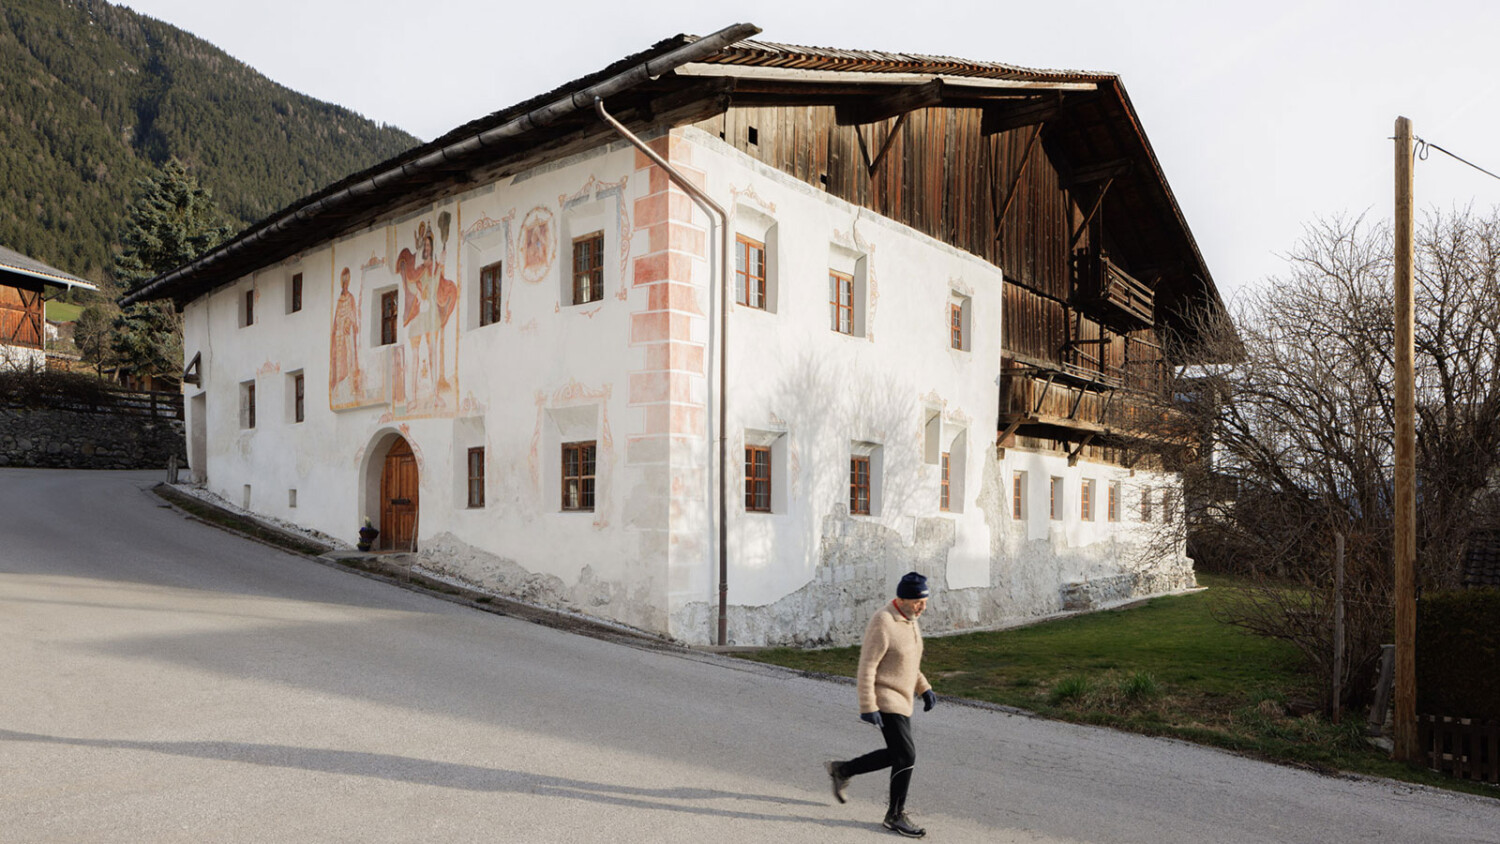 “No Right Angles” – Moritz Orgler Photographs an Early 16th Century Administrative Building in Austria